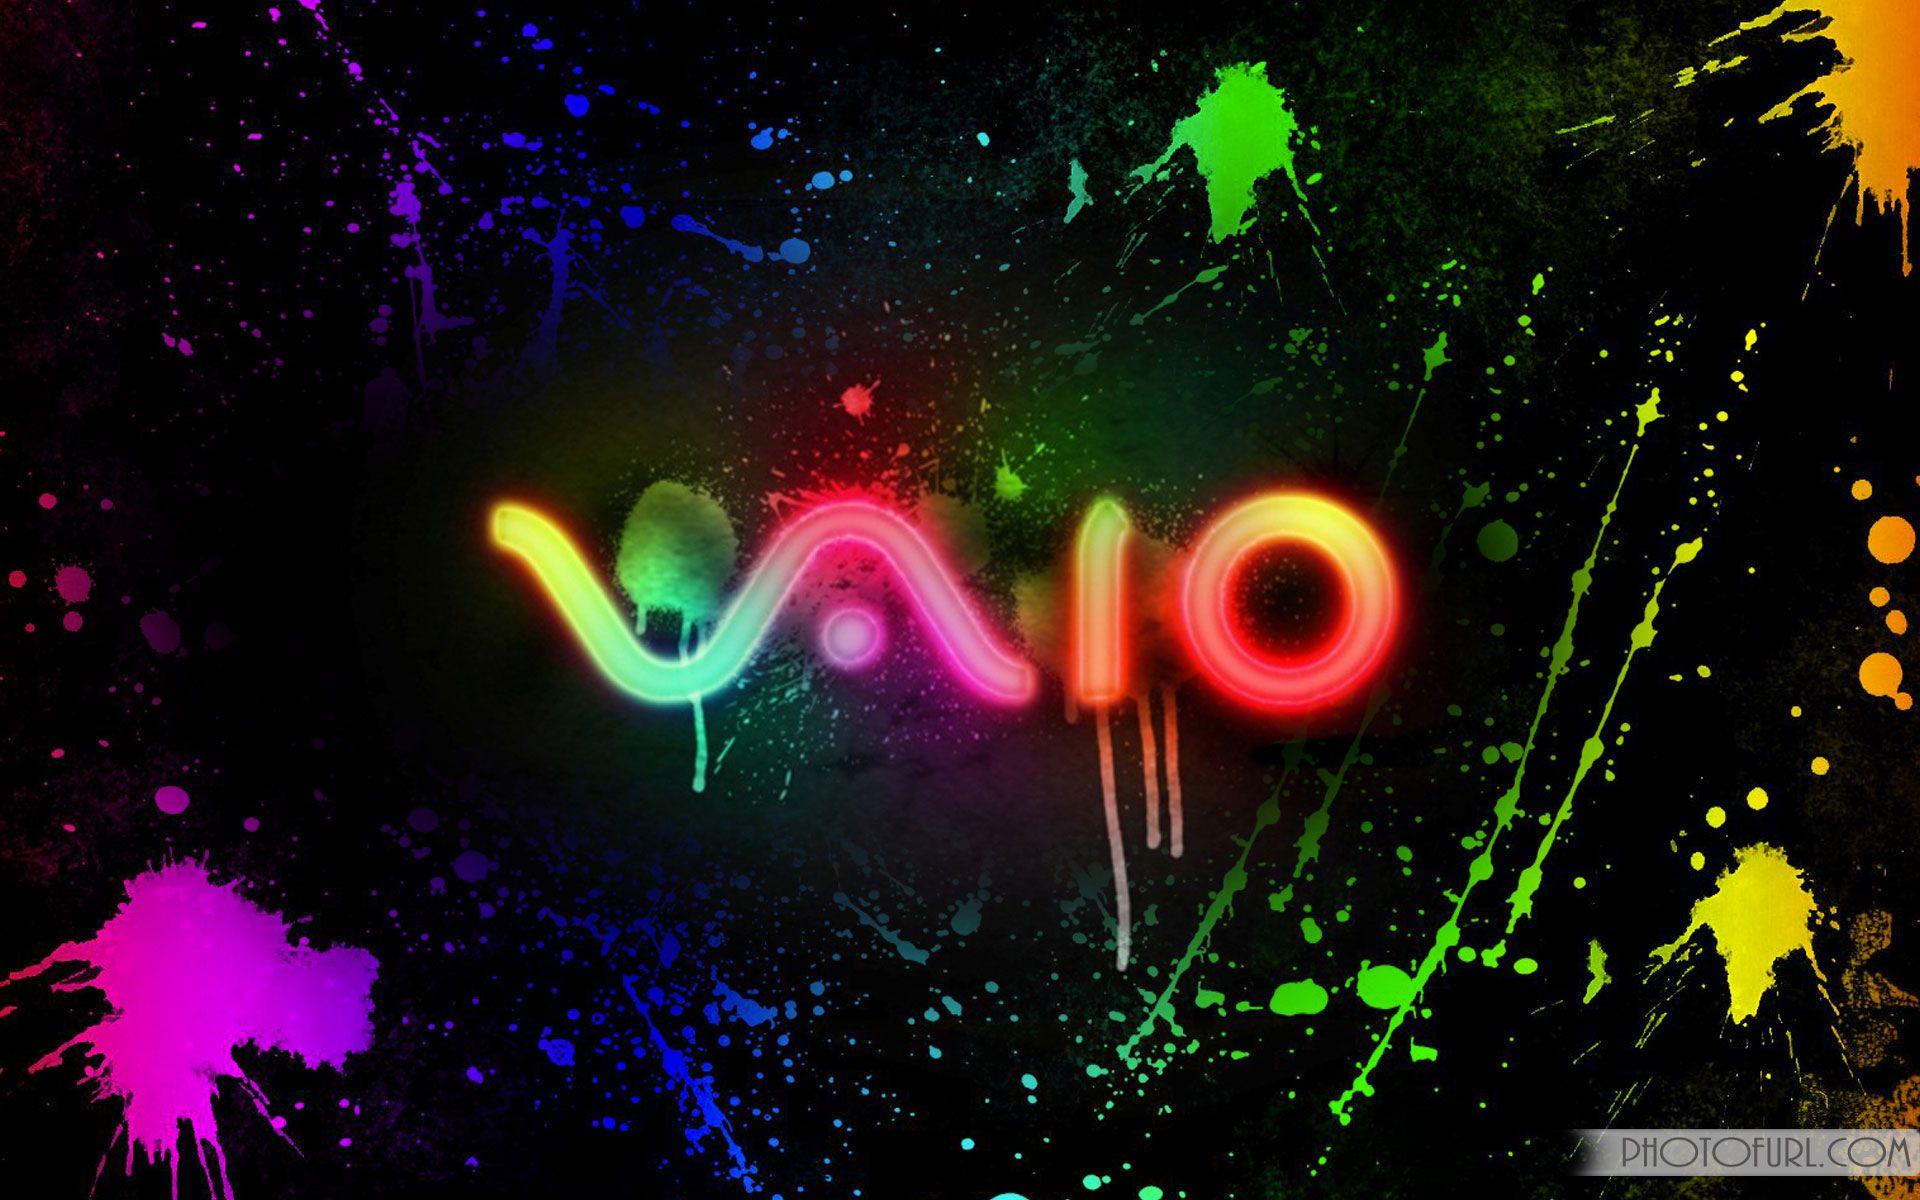 Sony Vaio Laptop Wallpapers Top Free Sony Vaio Laptop Backgrounds Wallpaperaccess